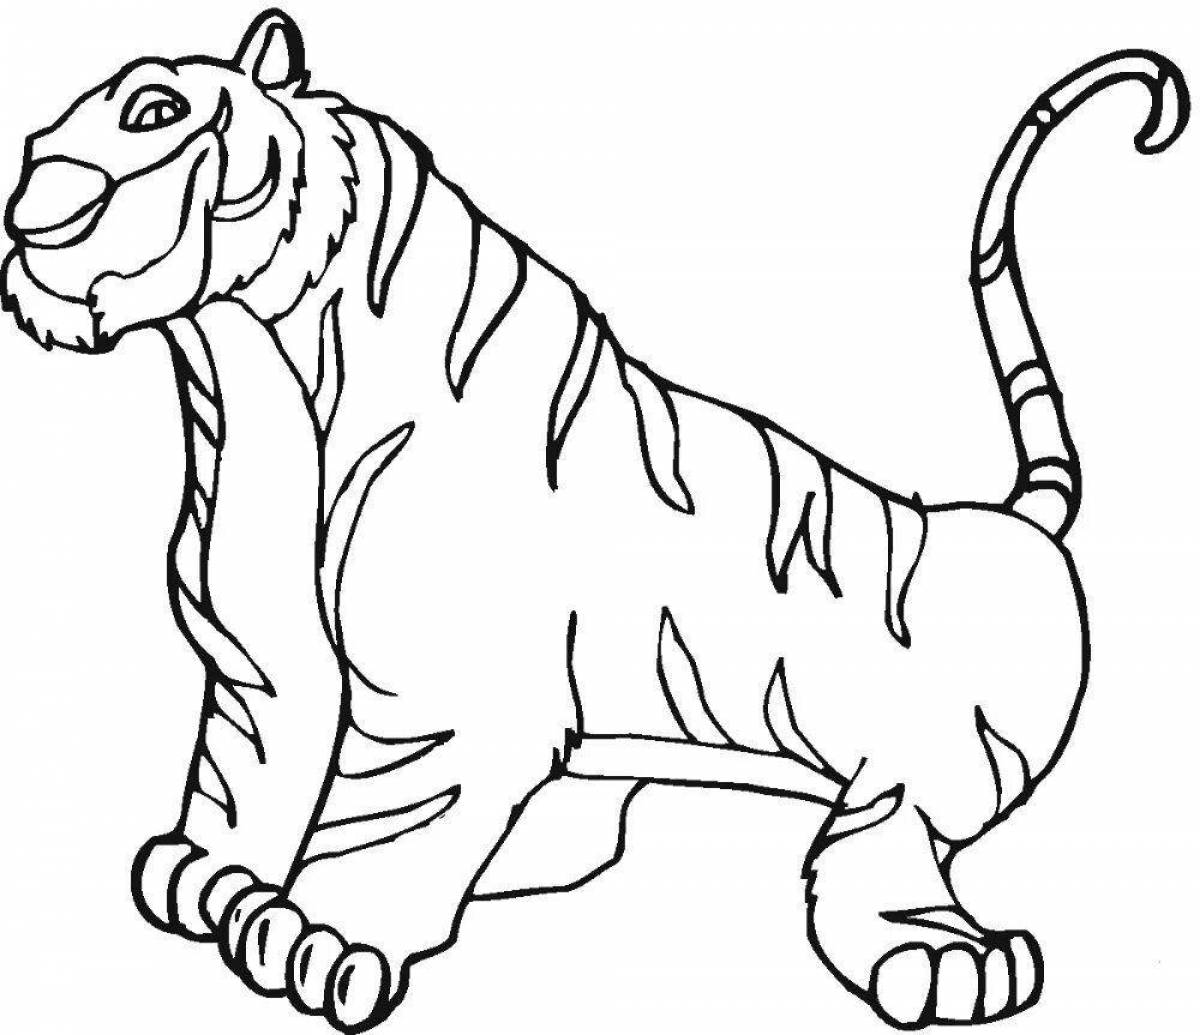 Amazing tiger coloring page for kids